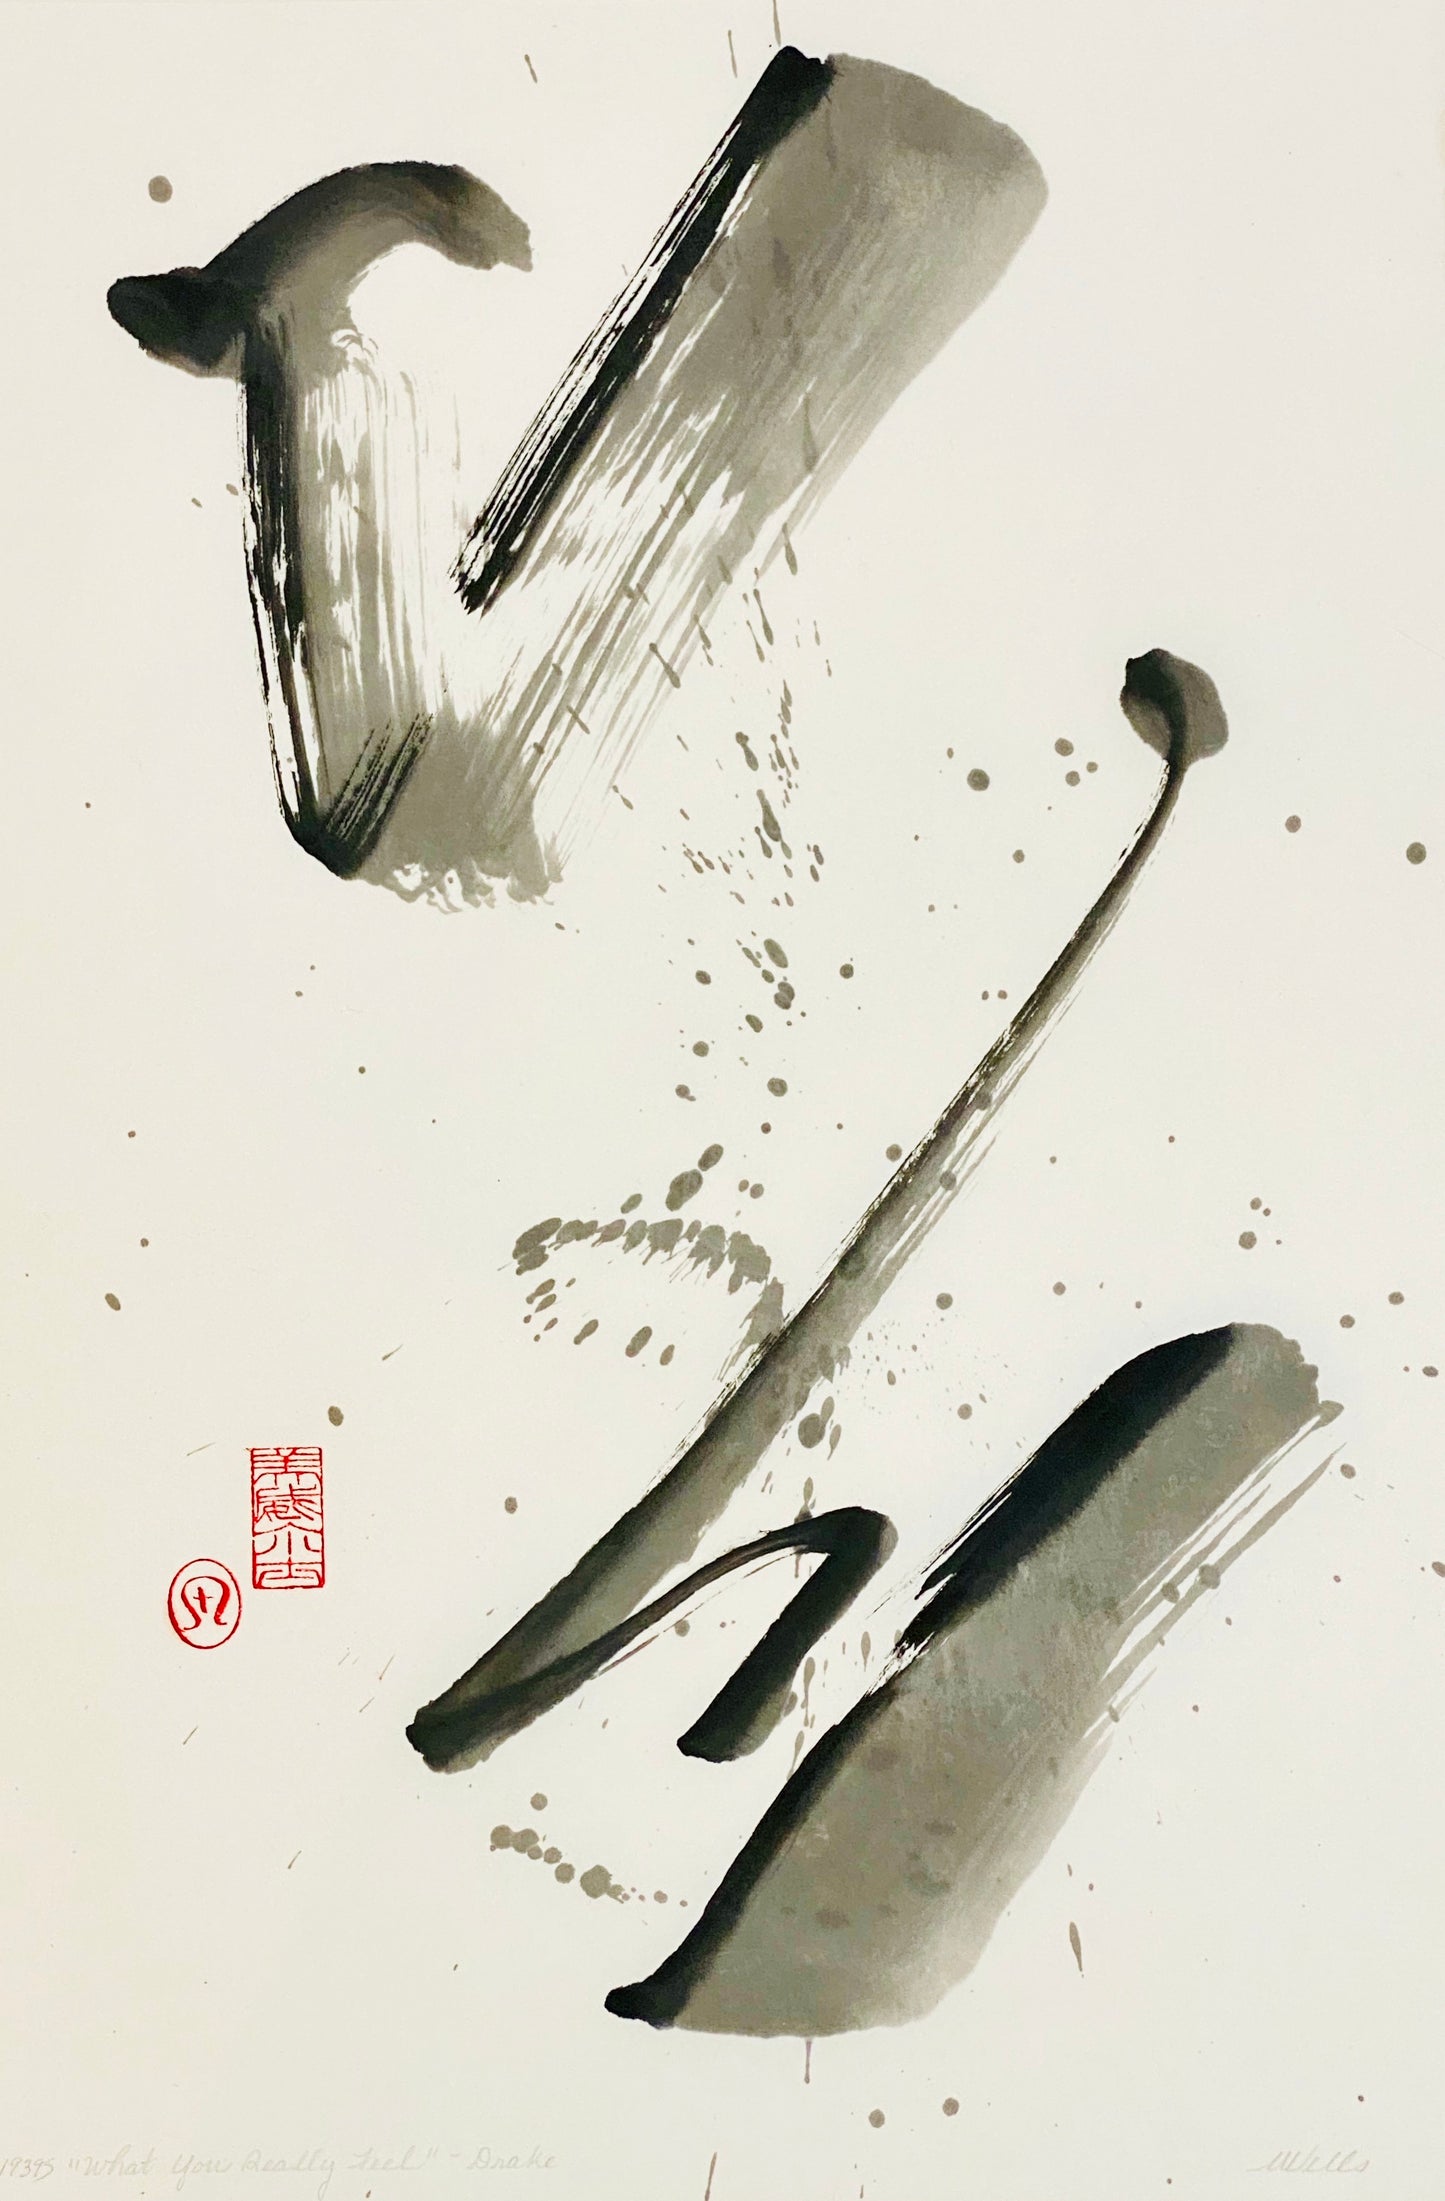 Abstract Sumi e Painting “Howt You Really ” by Marilyn Wells Original from Drake, ink wash, Zen style